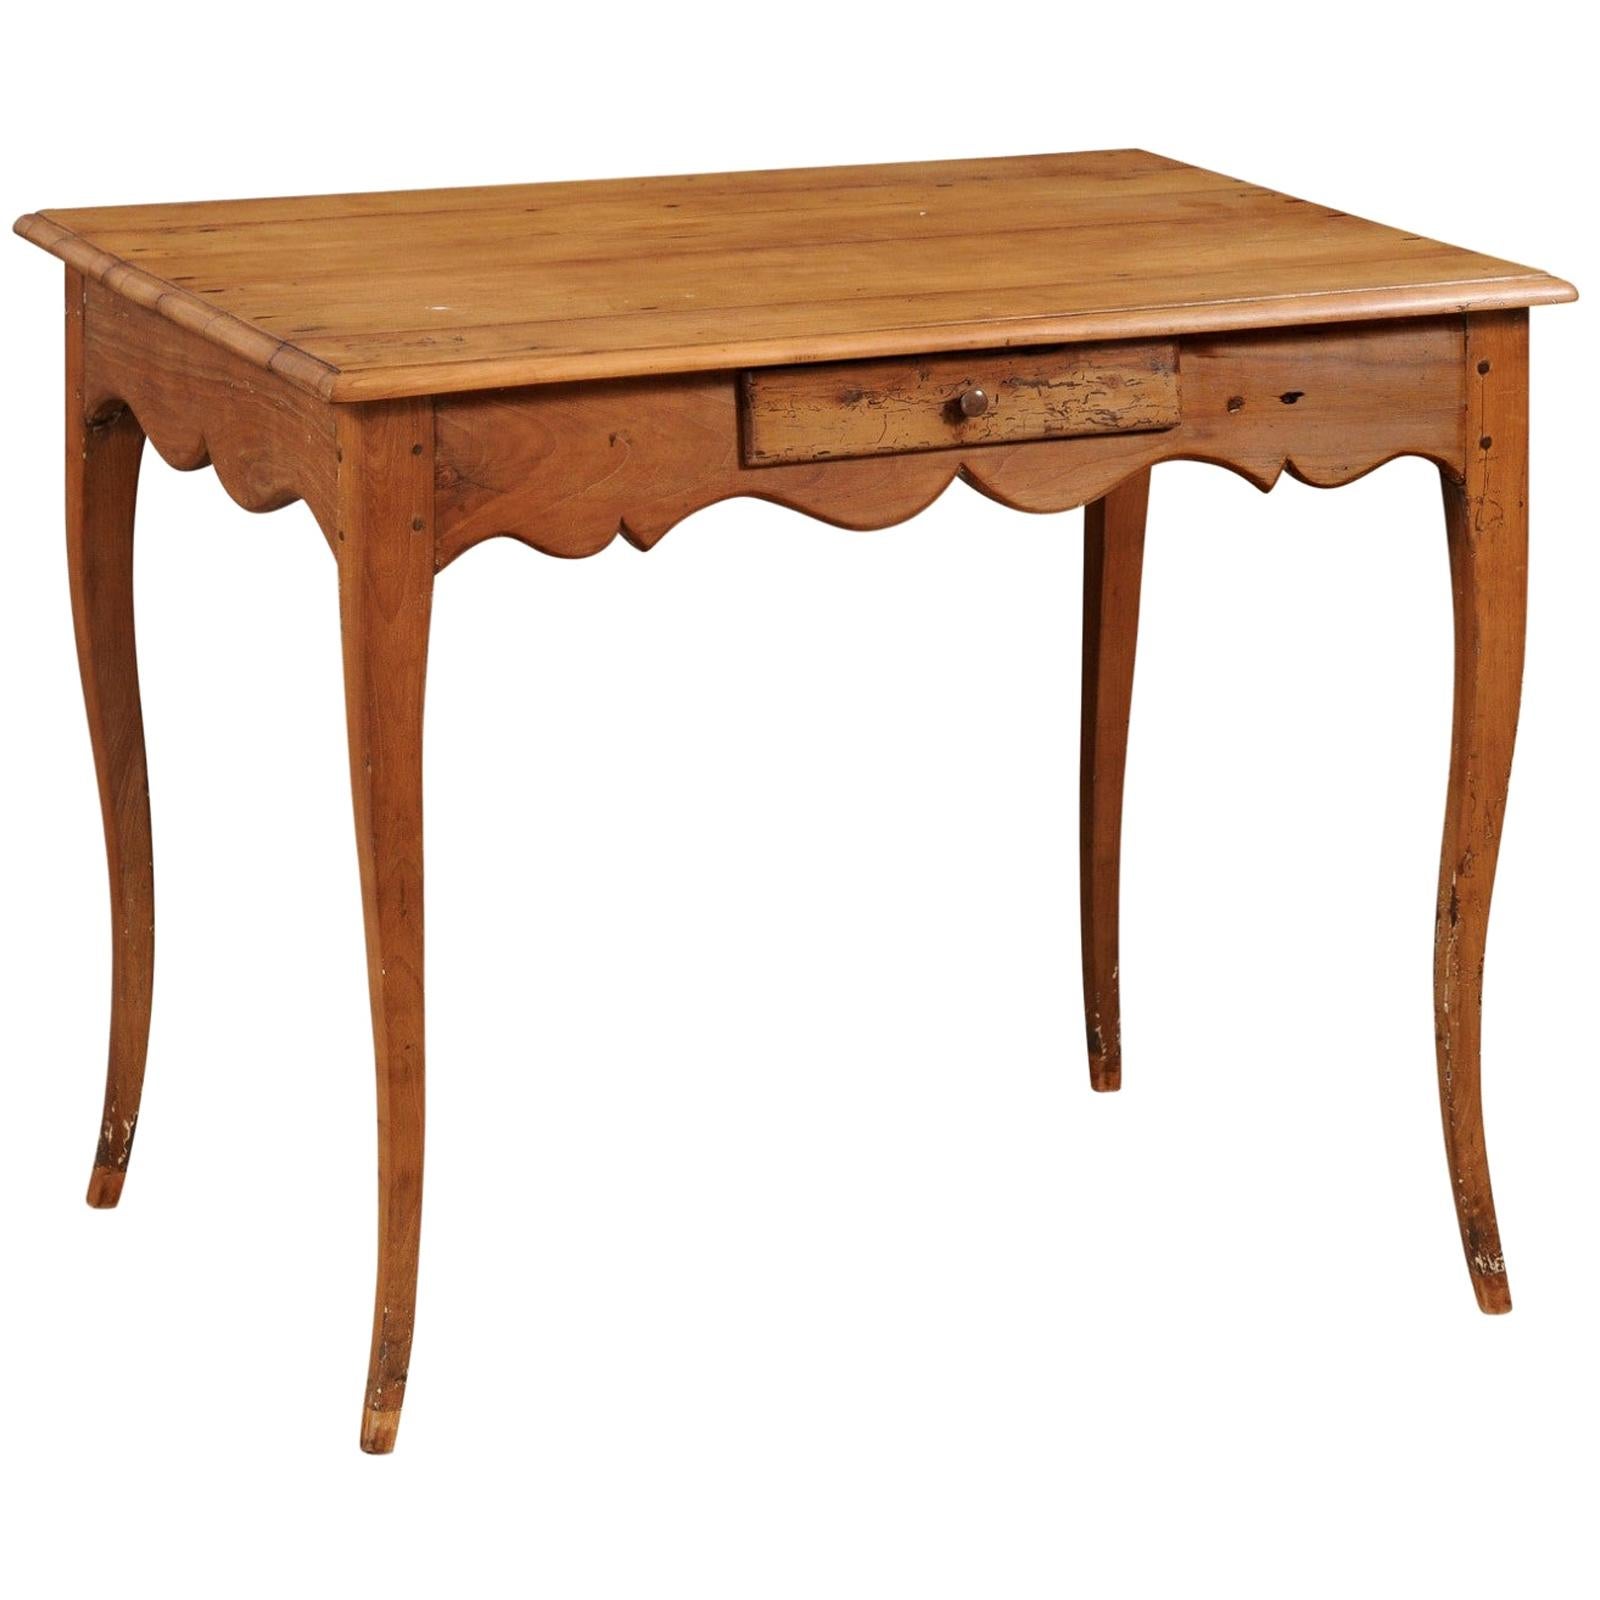 French 1750s Louis XV Period Cherry Table with Single Drawer and Scalloped Apron